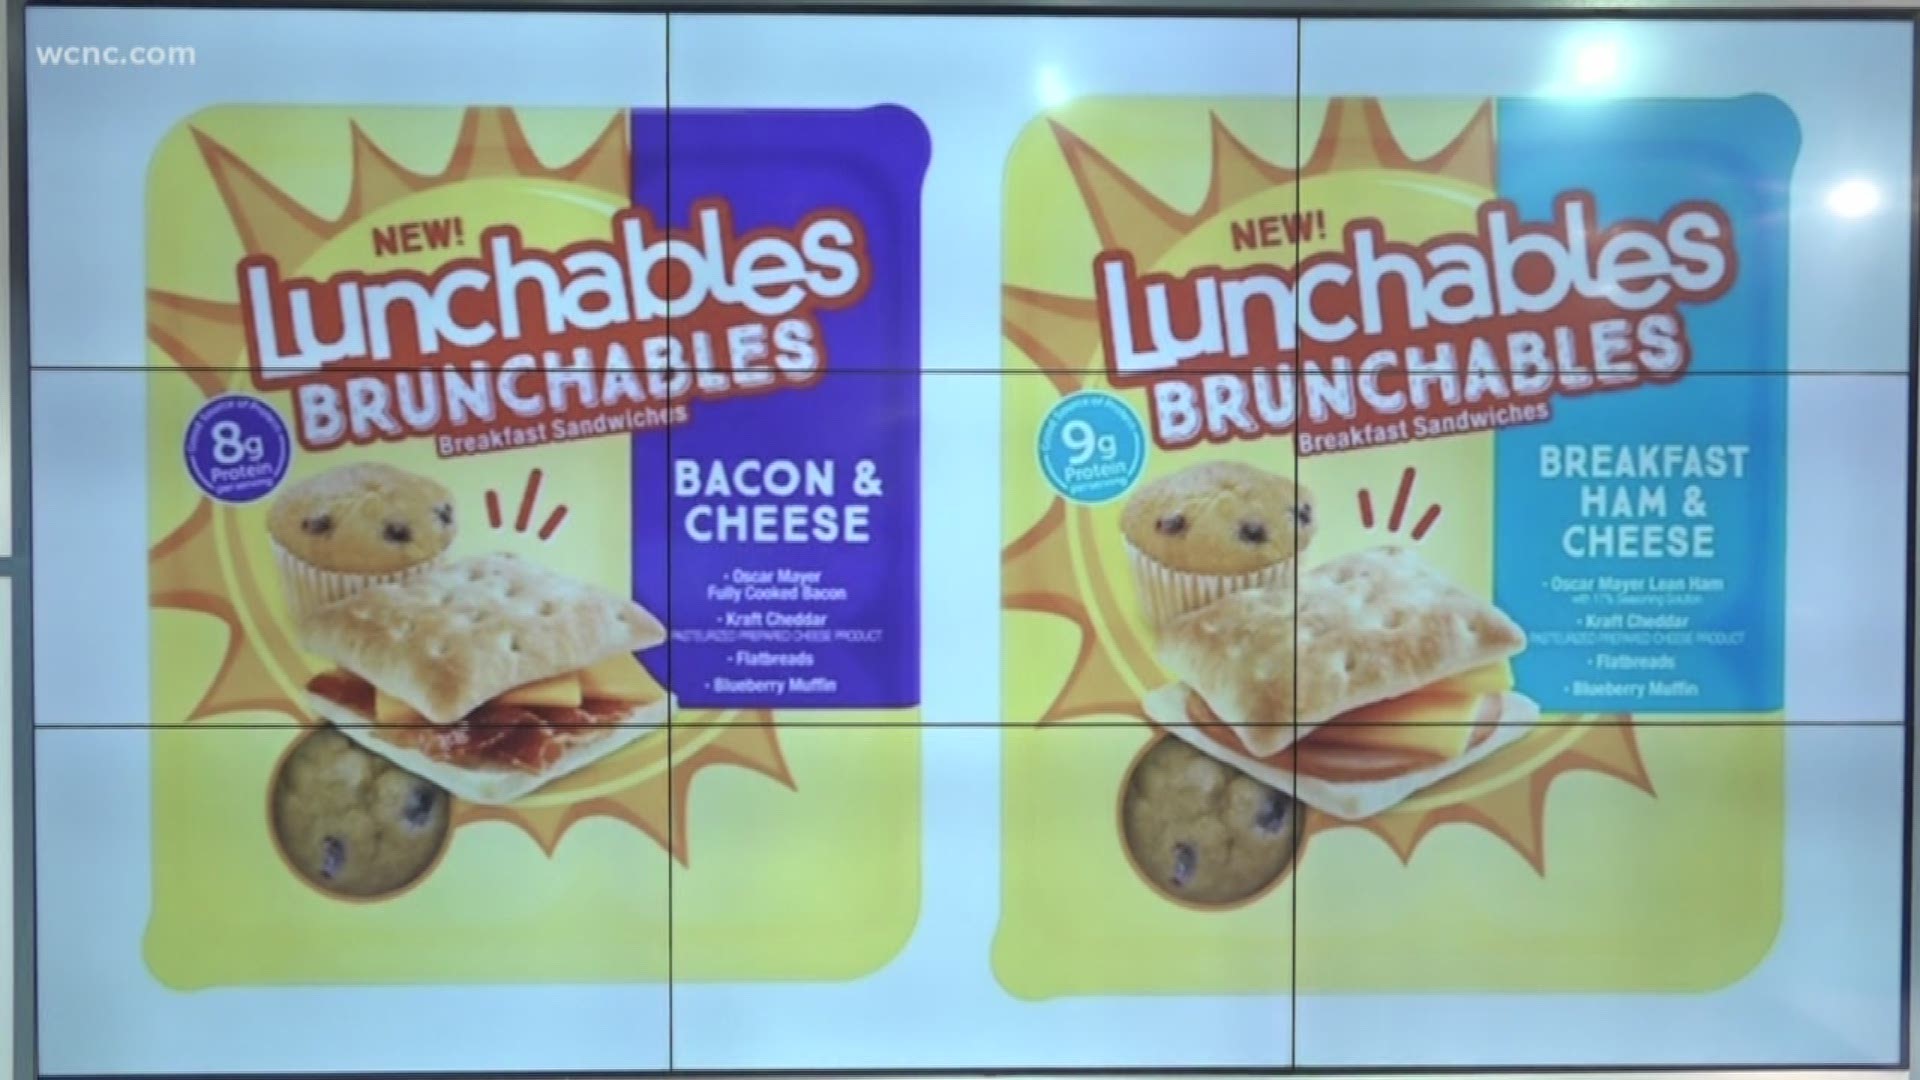 Even the kids are getting in on brunch these days. The iconic childhood meal-snack Lunchables announced it is releasing a new series of breakfast-style meals called Brunchables.